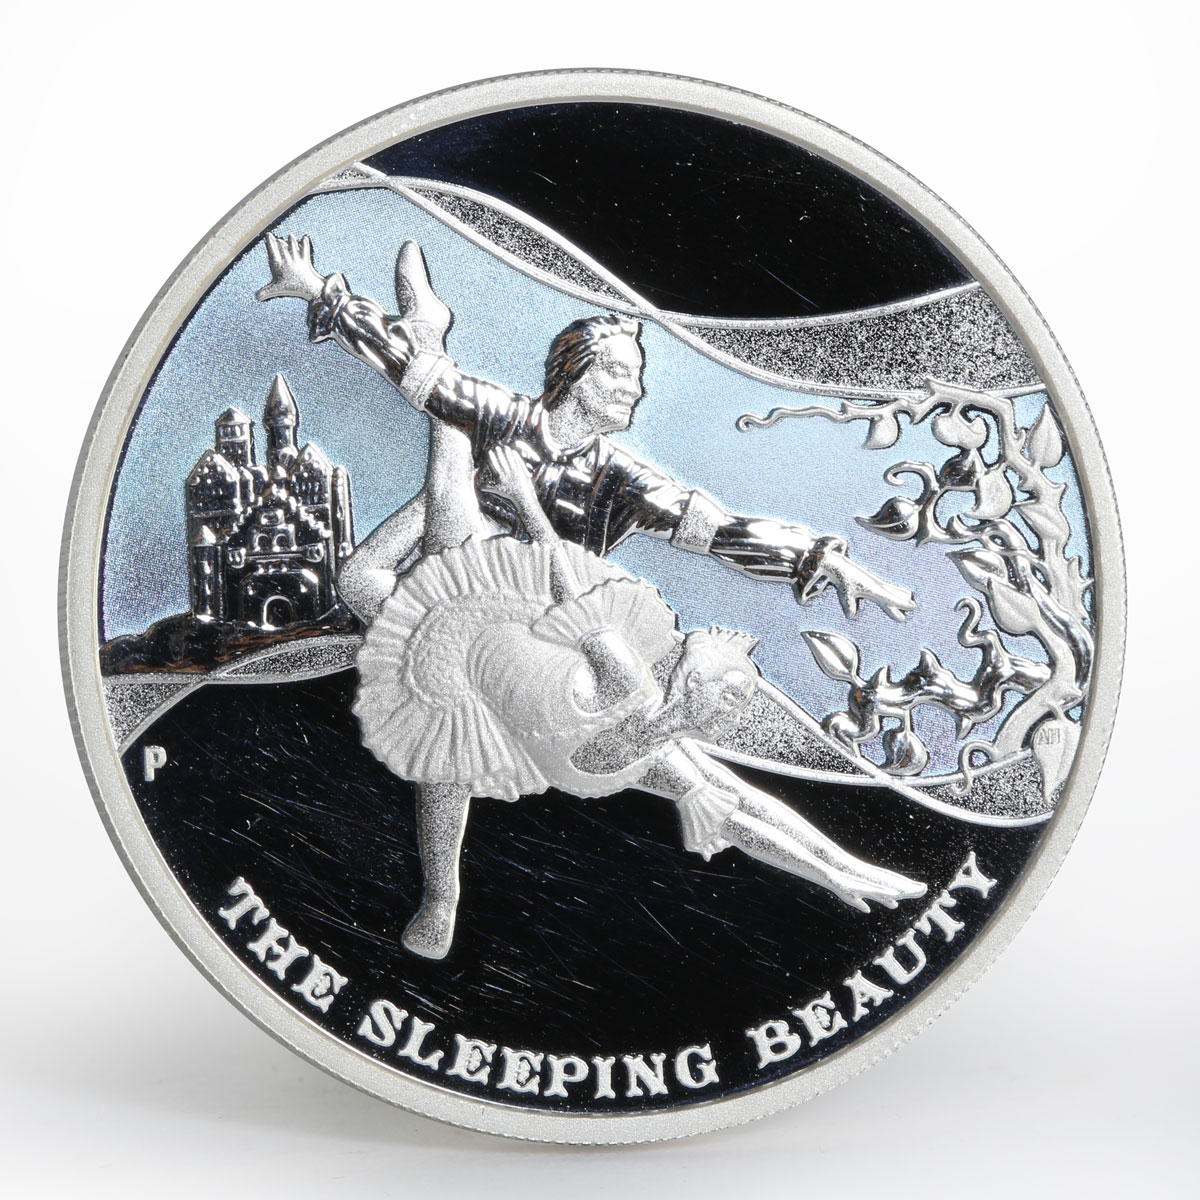 Tuvalu 1 dollar Ballet The Sleeping Beauty proof silver coin 2010